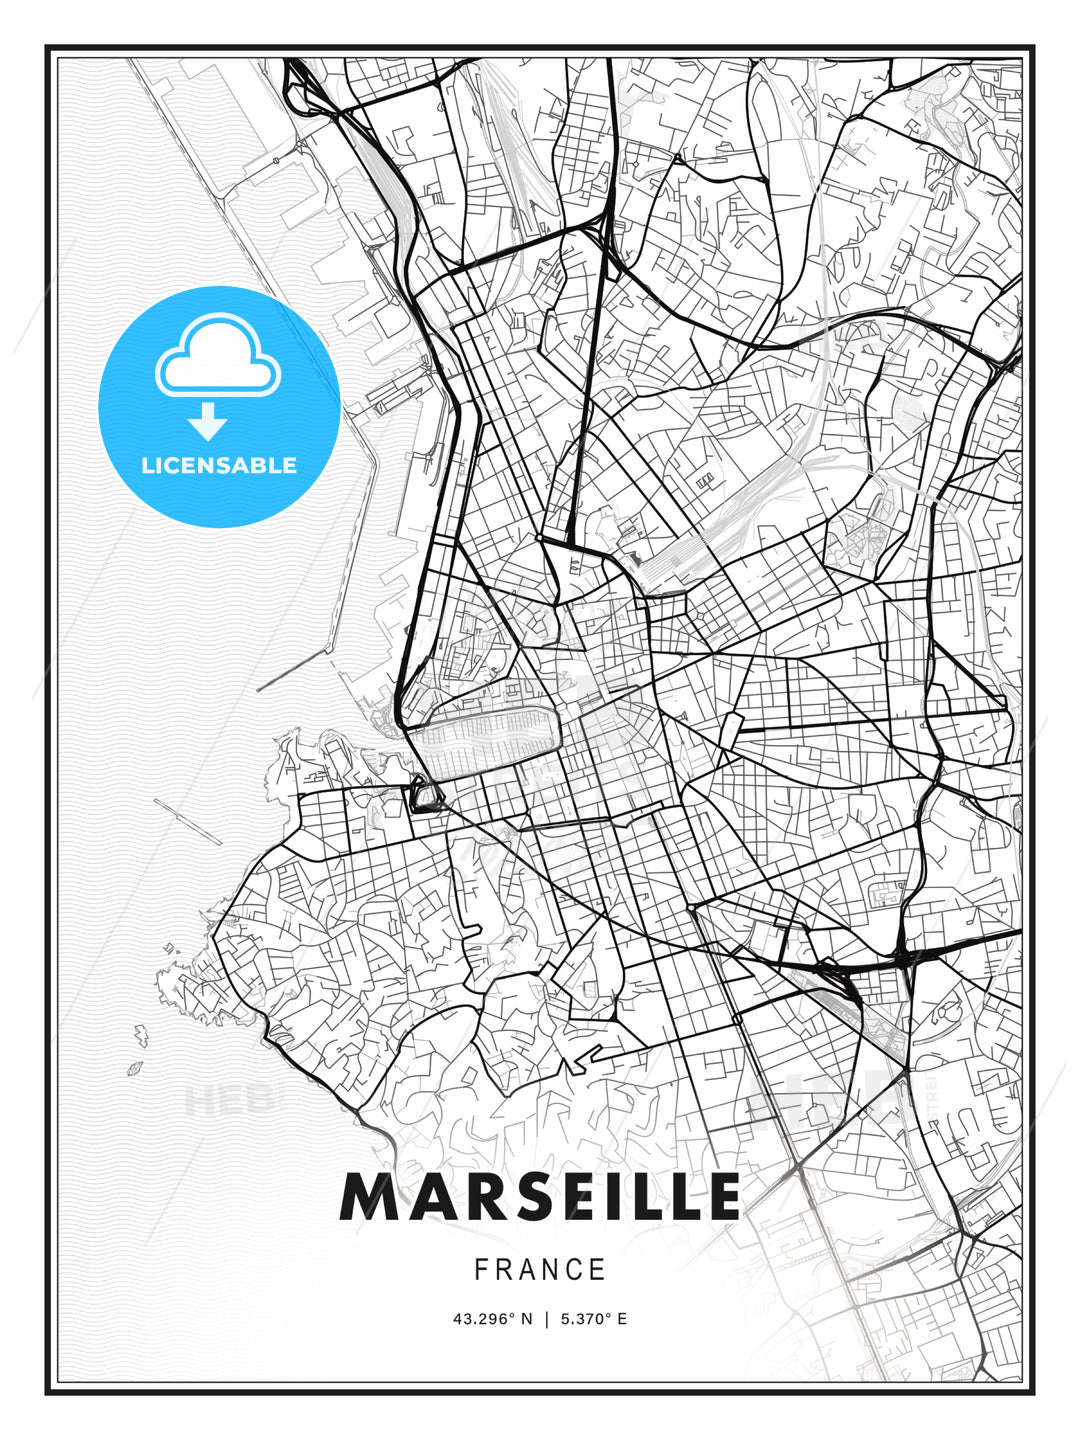 Marseille, France, Modern Print Template in Various Formats - HEBSTREITS Sketches